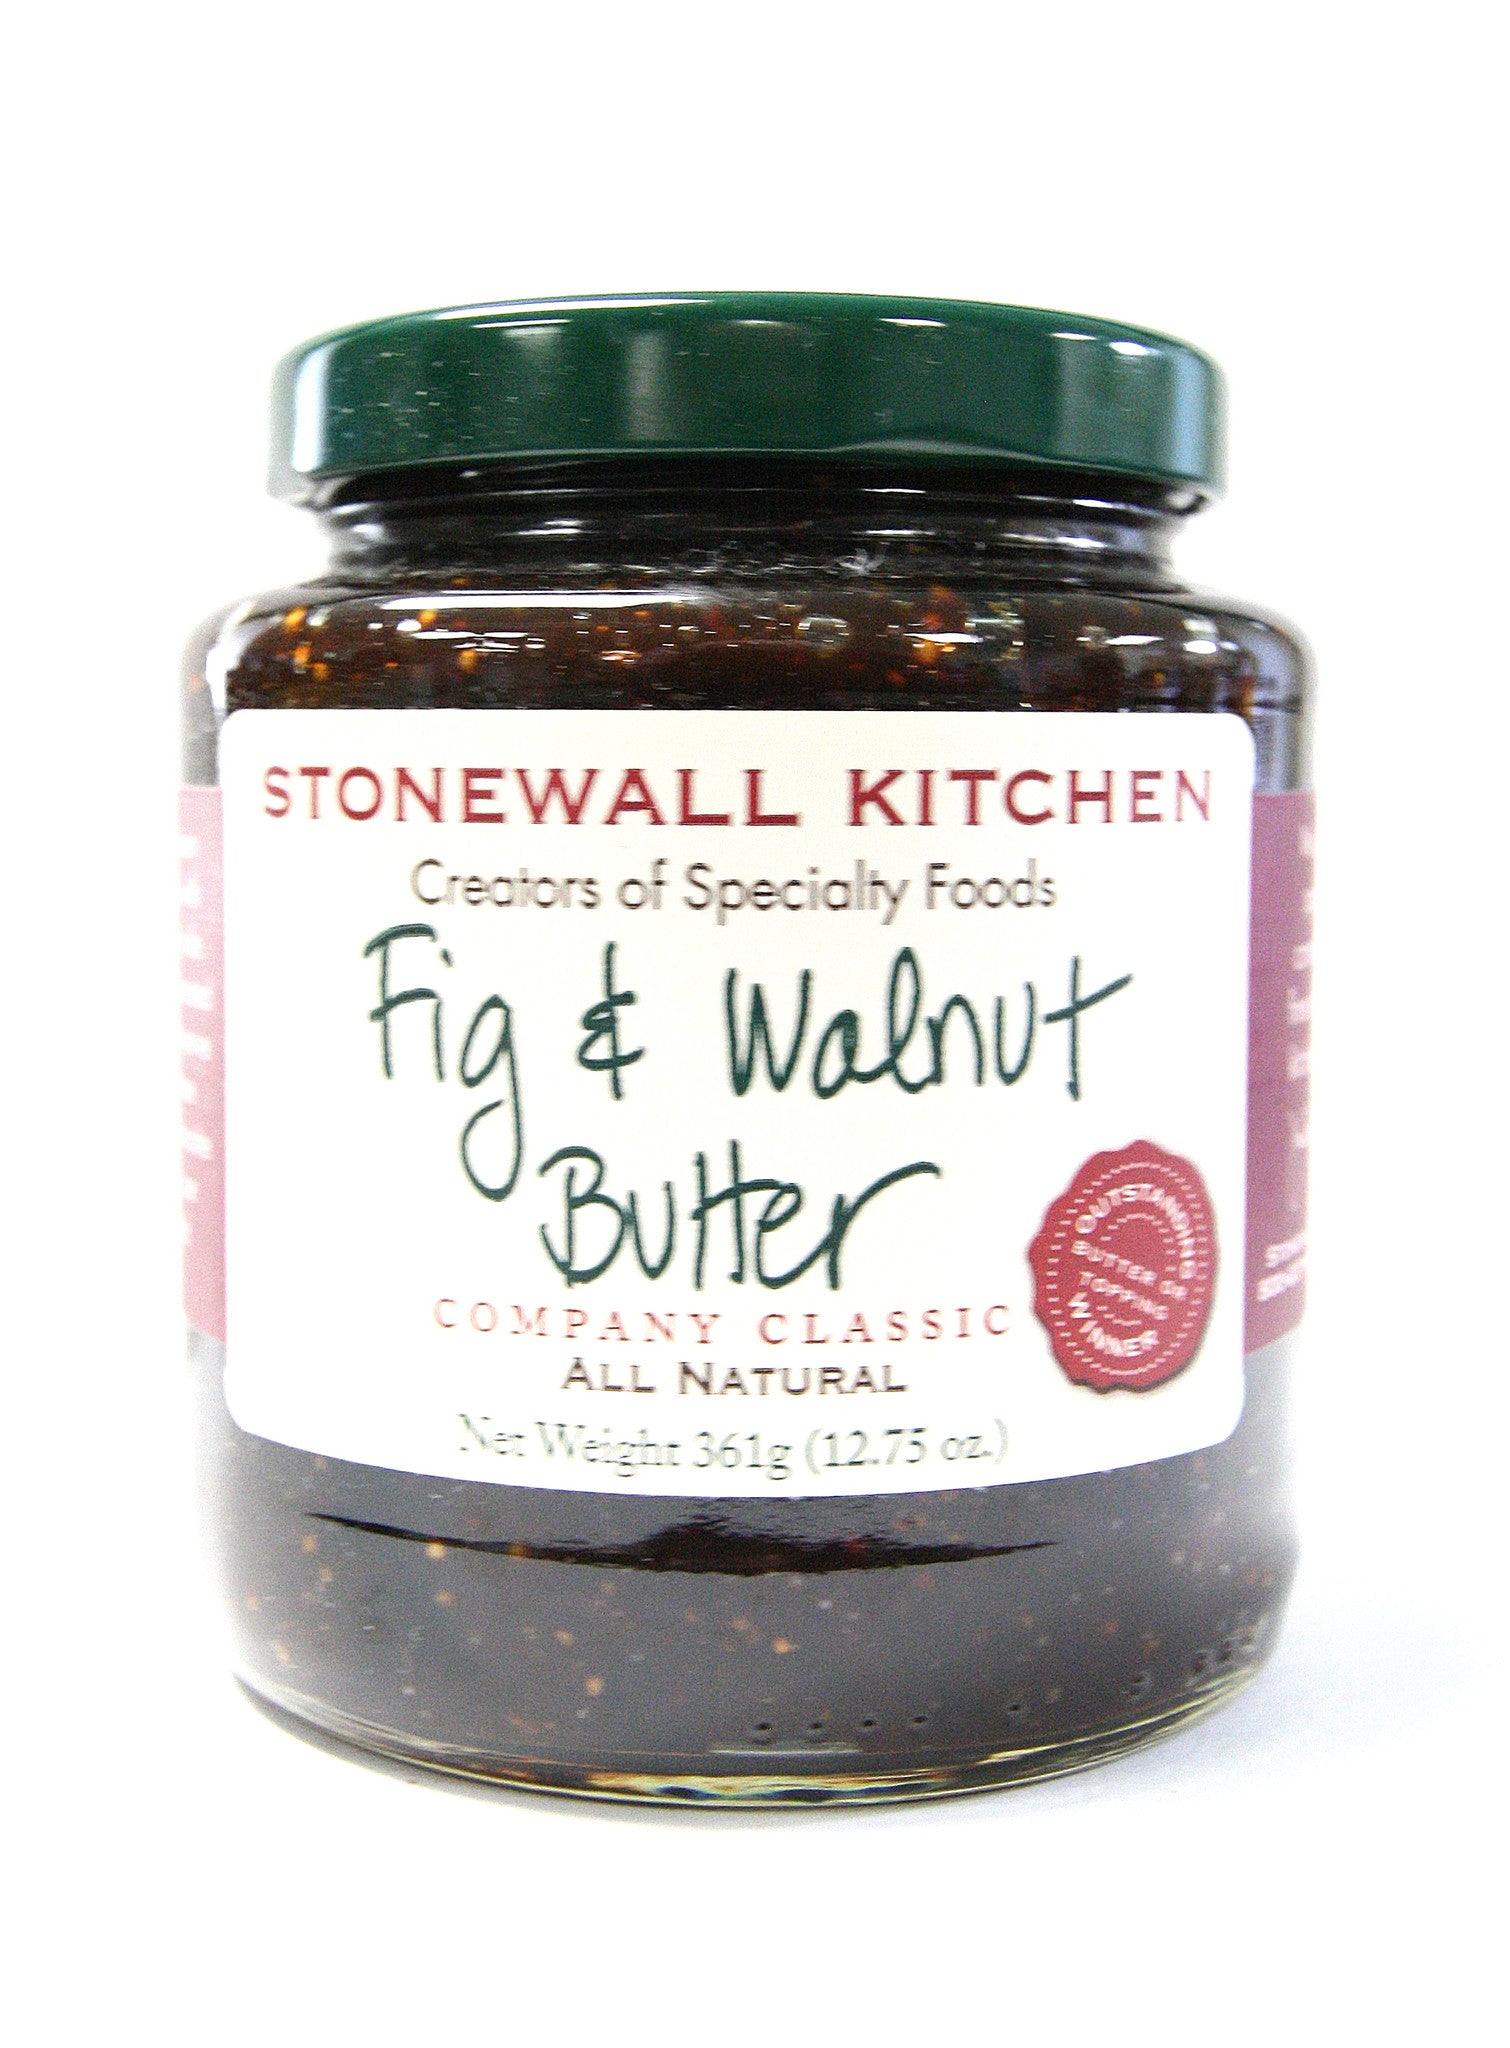 Stonewall & Walnut Butter countrymercantile